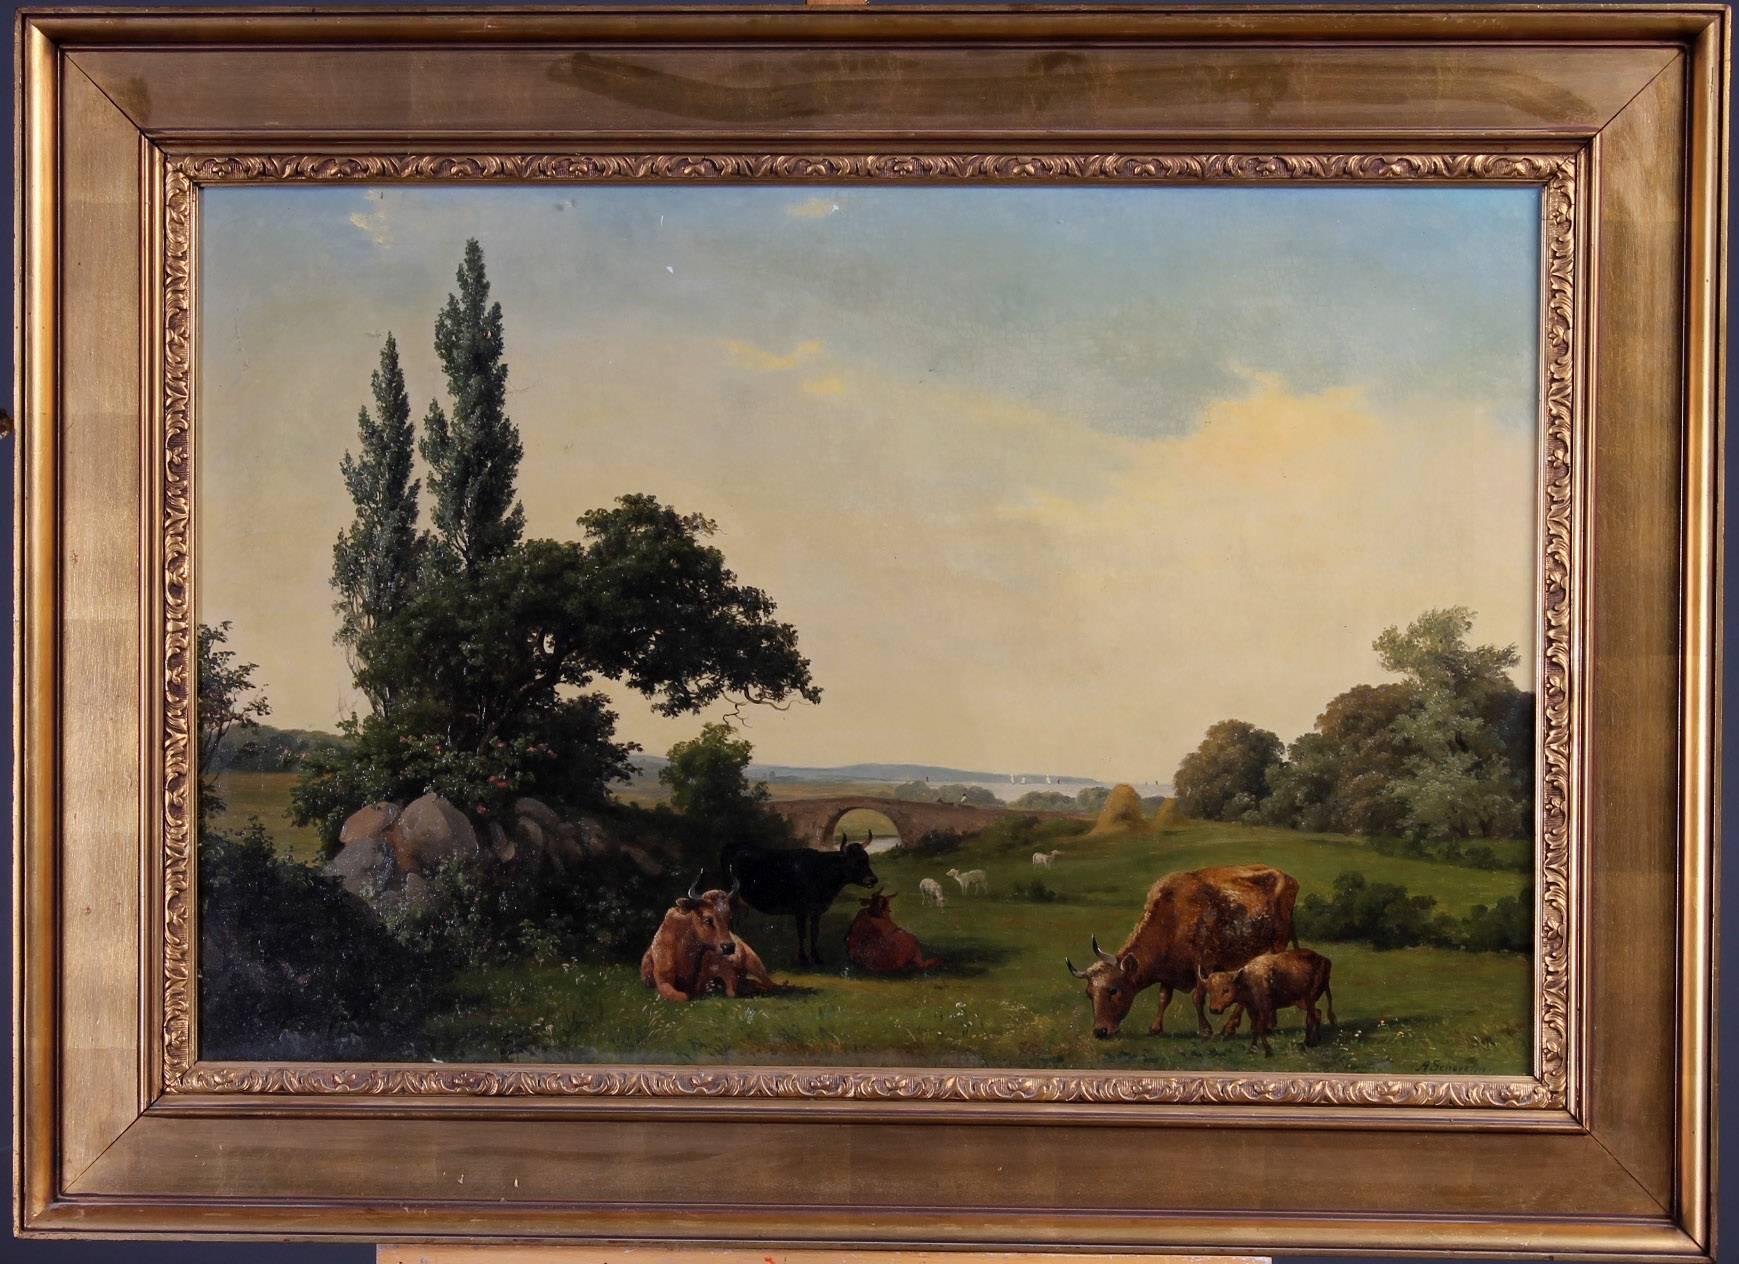 Danish summer landscape with cows and sheep, in the background the river and a bridge with a person on a horse-drawn carriage.
Oil painting on canvas by the Danish landscape painter Axel Schovelin (1827-1893).